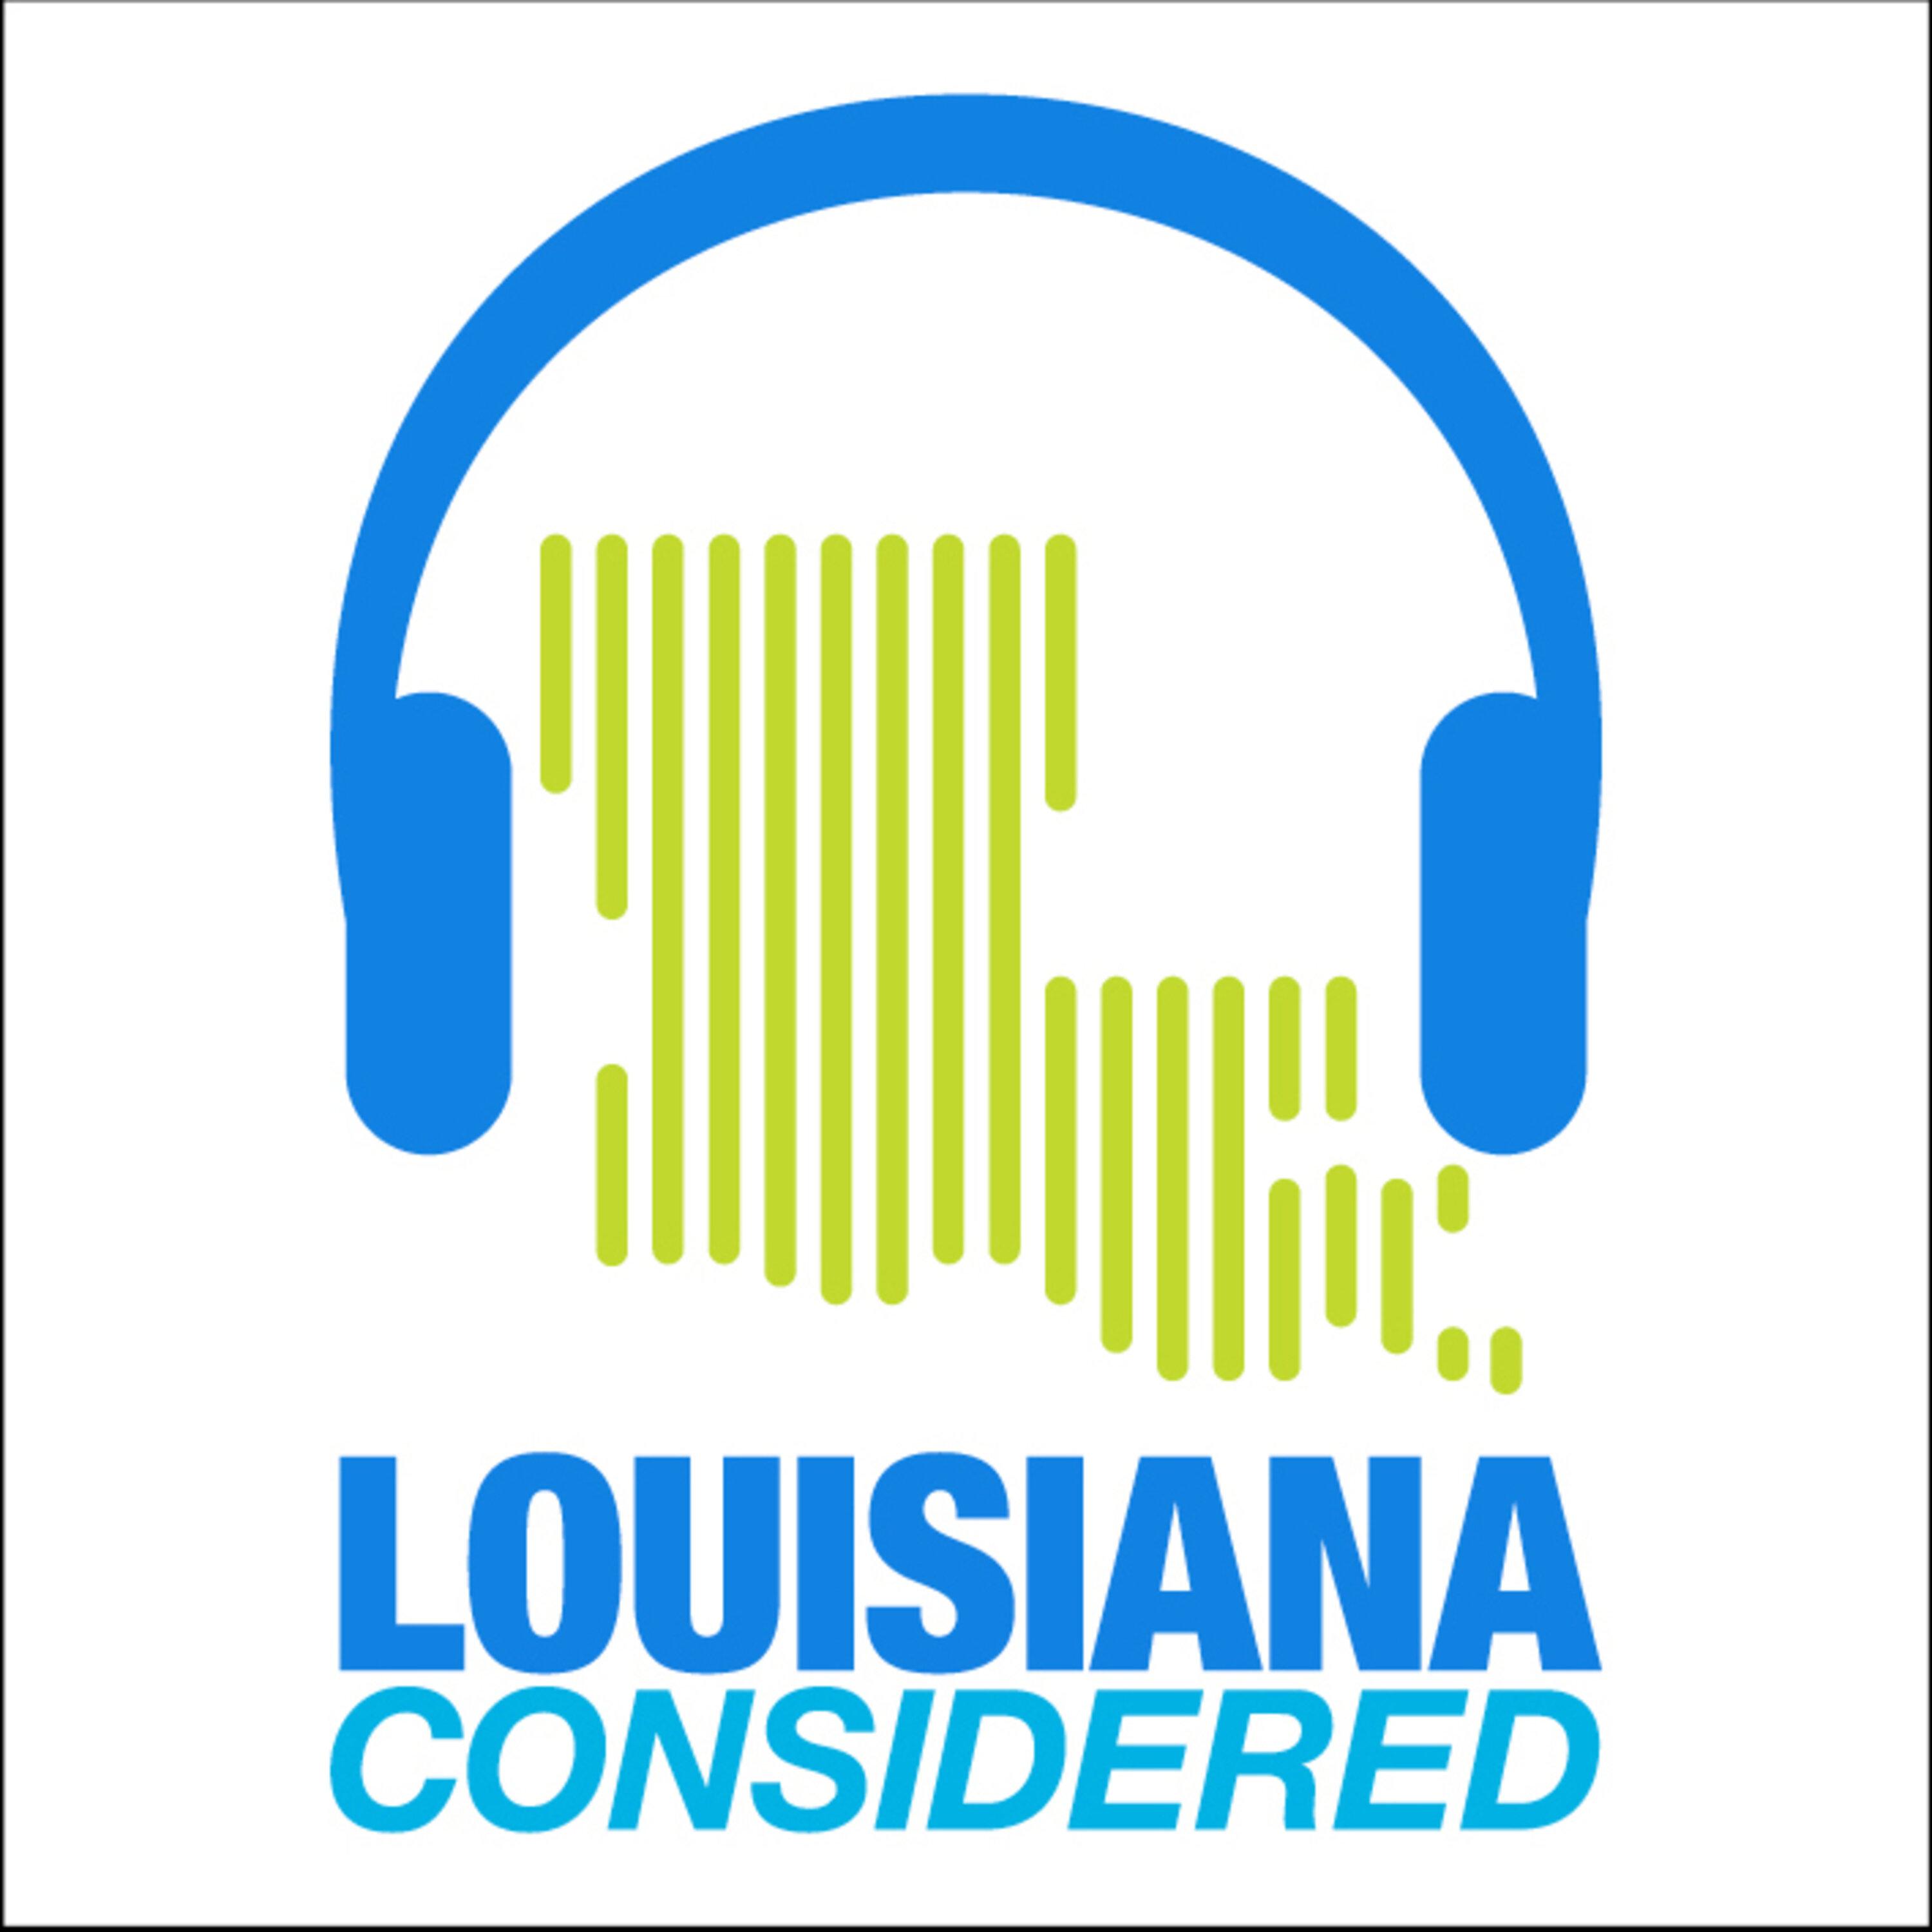 Thumbnail for "Louisiana Considered: Louisiana’s Lost Gravesites, RISE St. James’ Fight Against Environmental Racism".